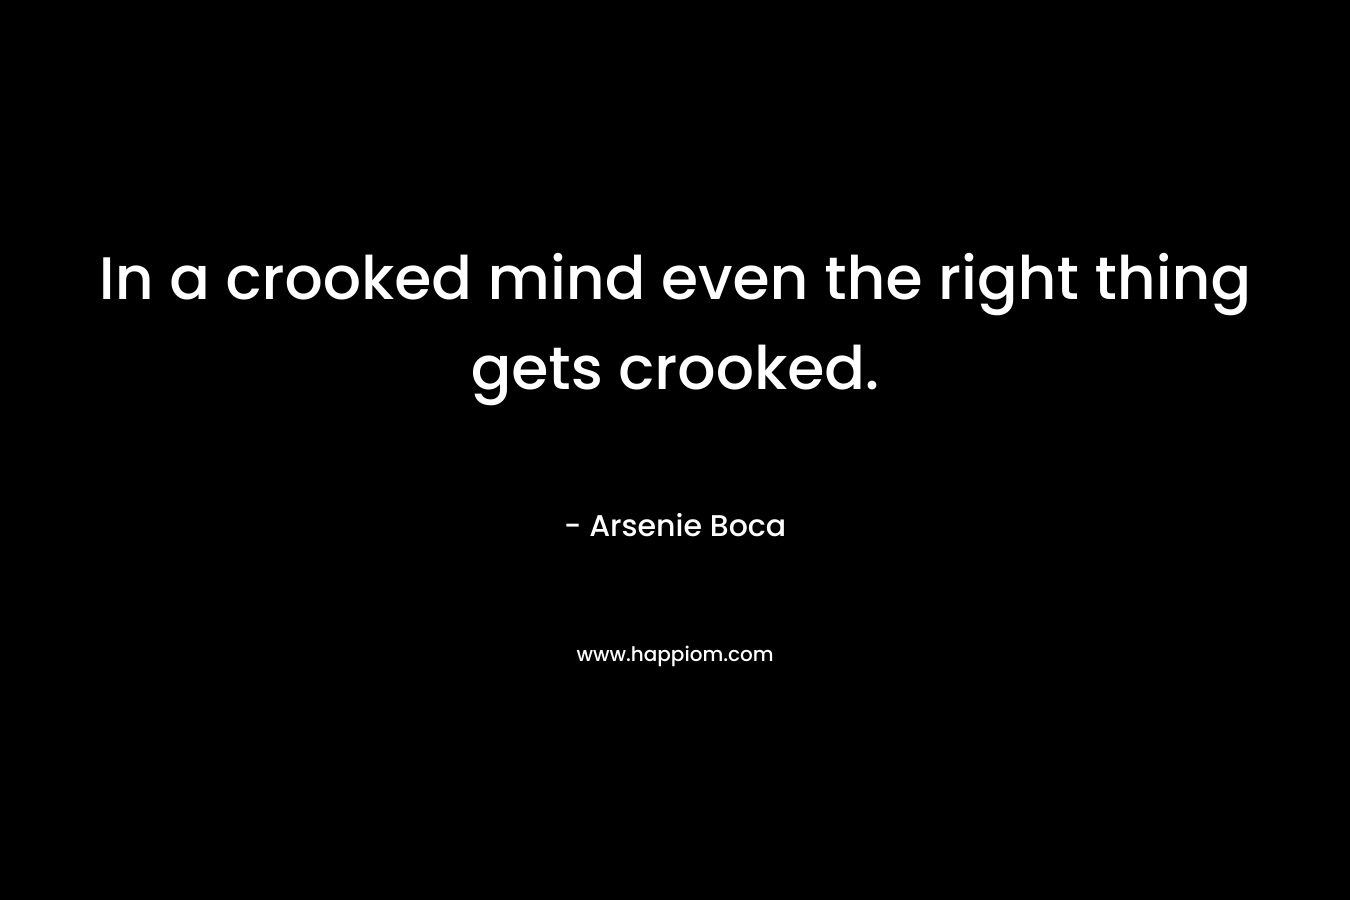 In a crooked mind even the right thing gets crooked.